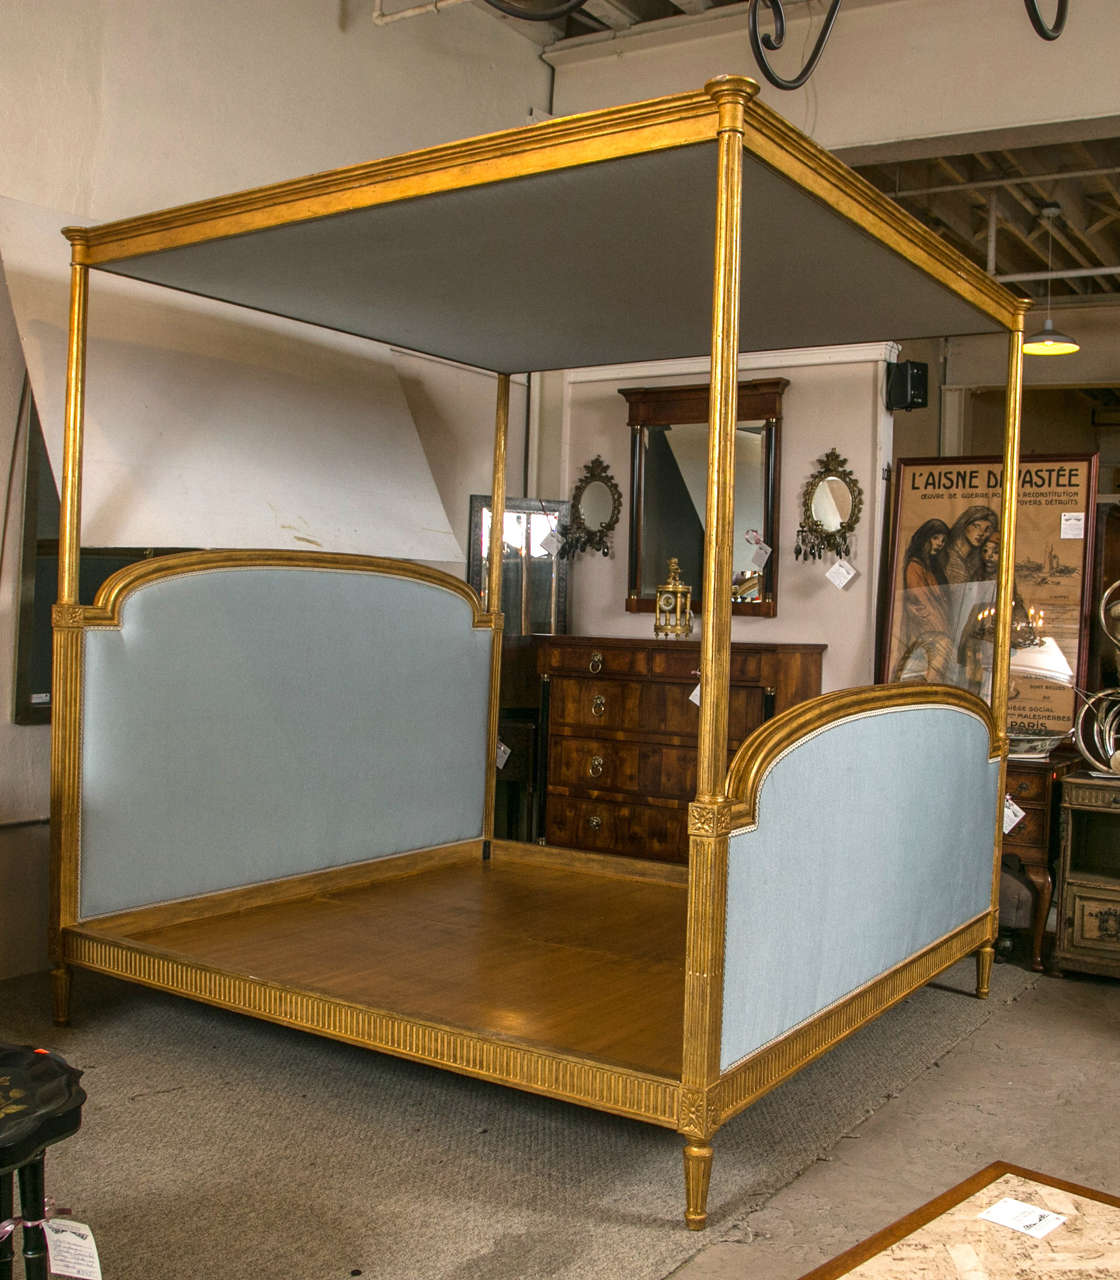 A French king-size canopy bed in giltwood Louis XVI fashion. This fine attributed Maison Jansen kings-sized bed is absolutely spectacular. The Louis XVI inspired look having a custom quaintly fine guiding. The overall finely distressed to have a